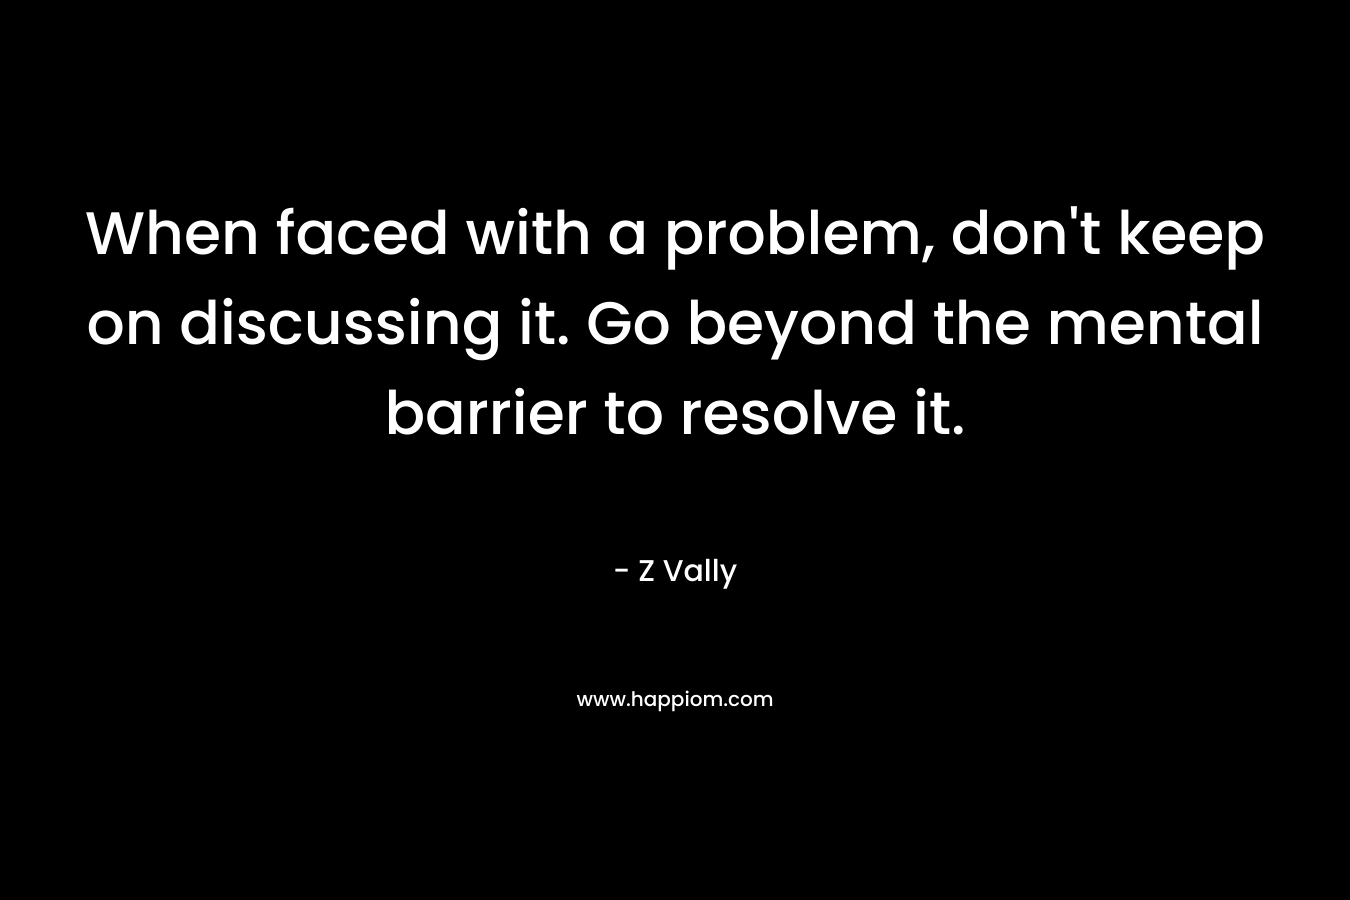 When faced with a problem, don't keep on discussing it. Go beyond the mental barrier to resolve it.